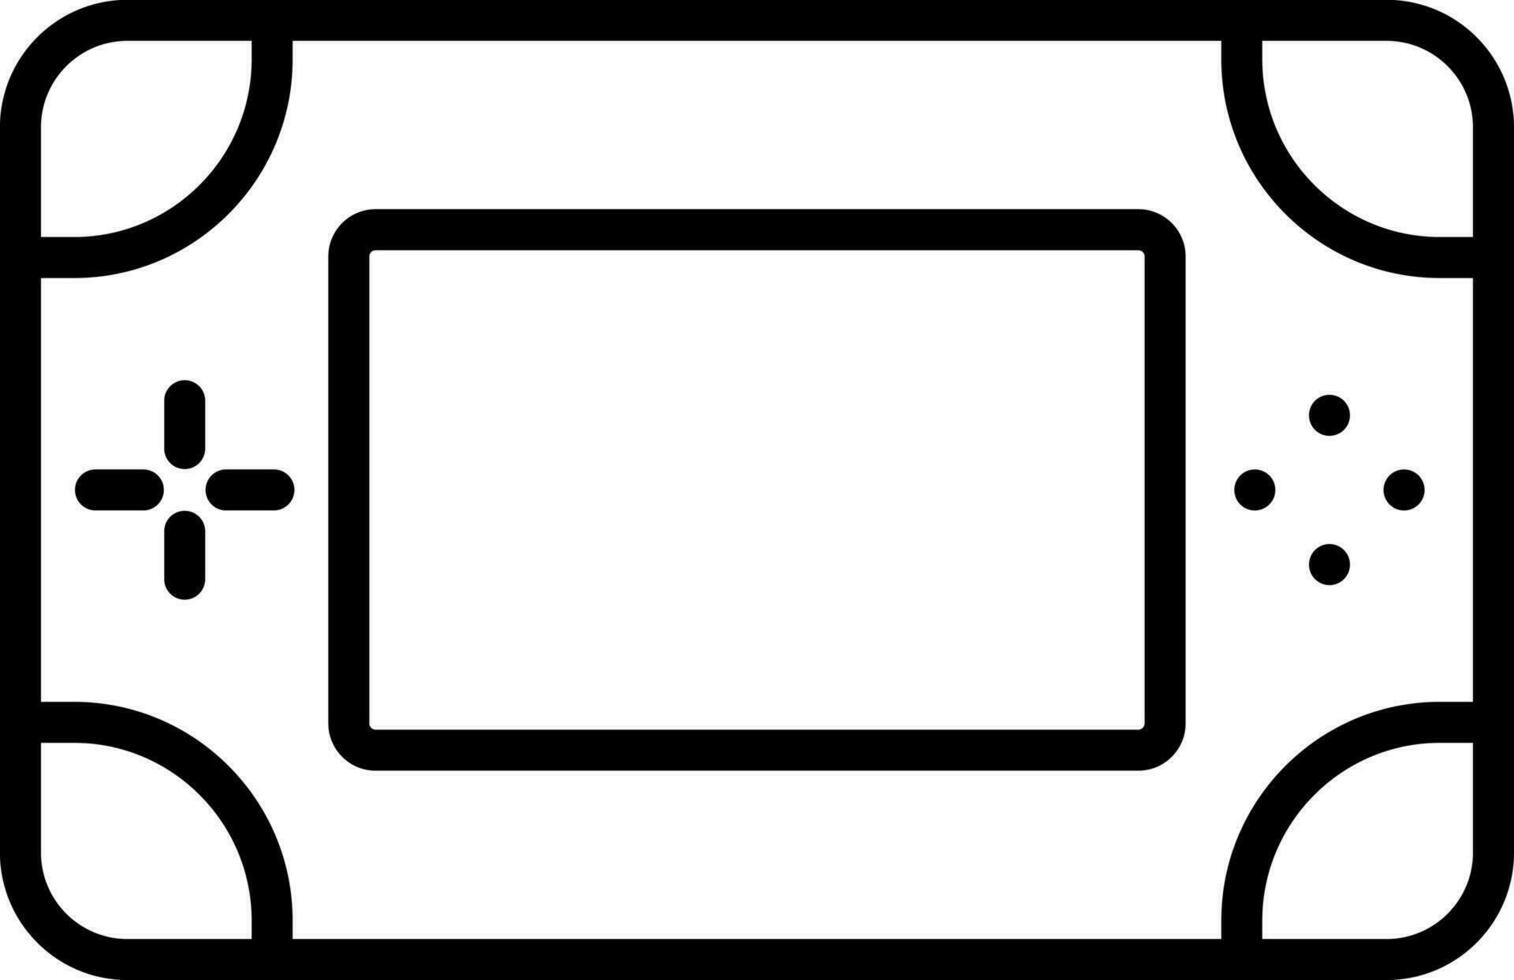 Isolated gamepad icon in black line art. vector